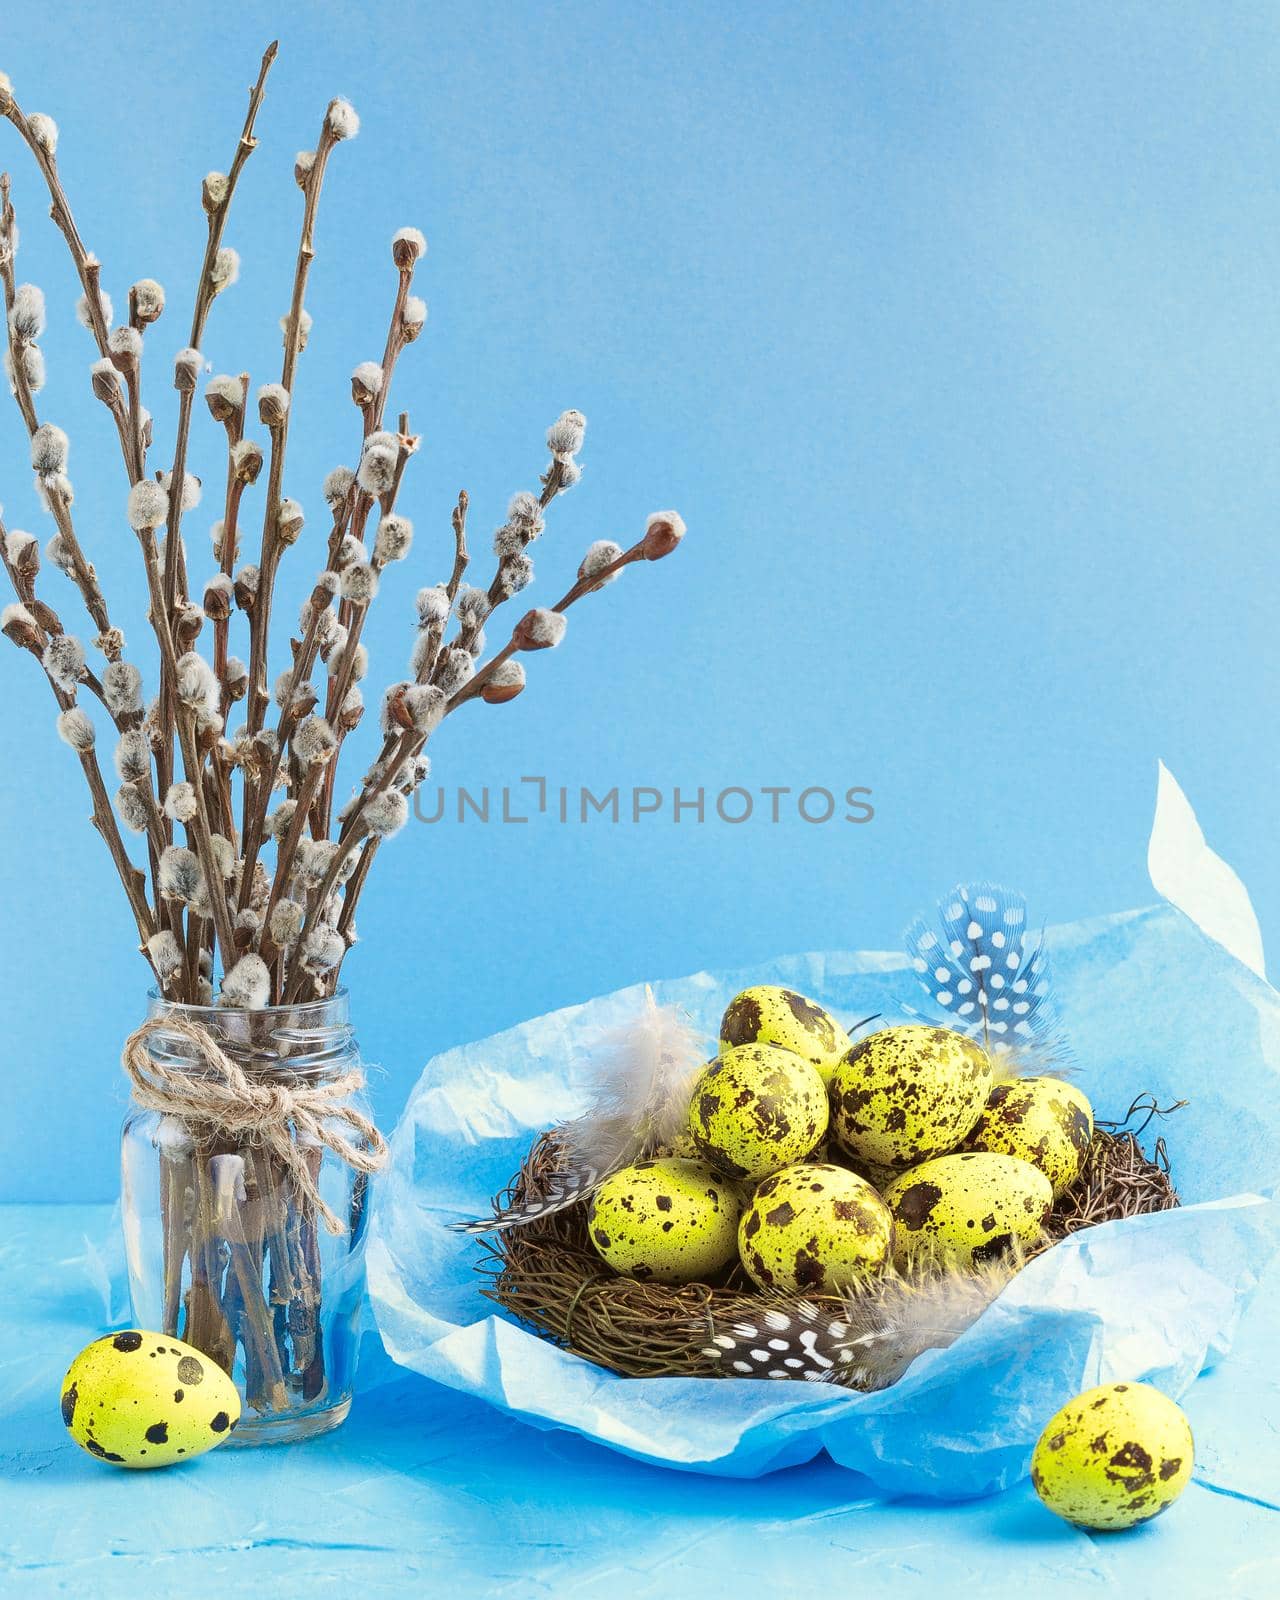 Pussy Willow or Palm Sunday Holiday in Ukraine by Syvanych